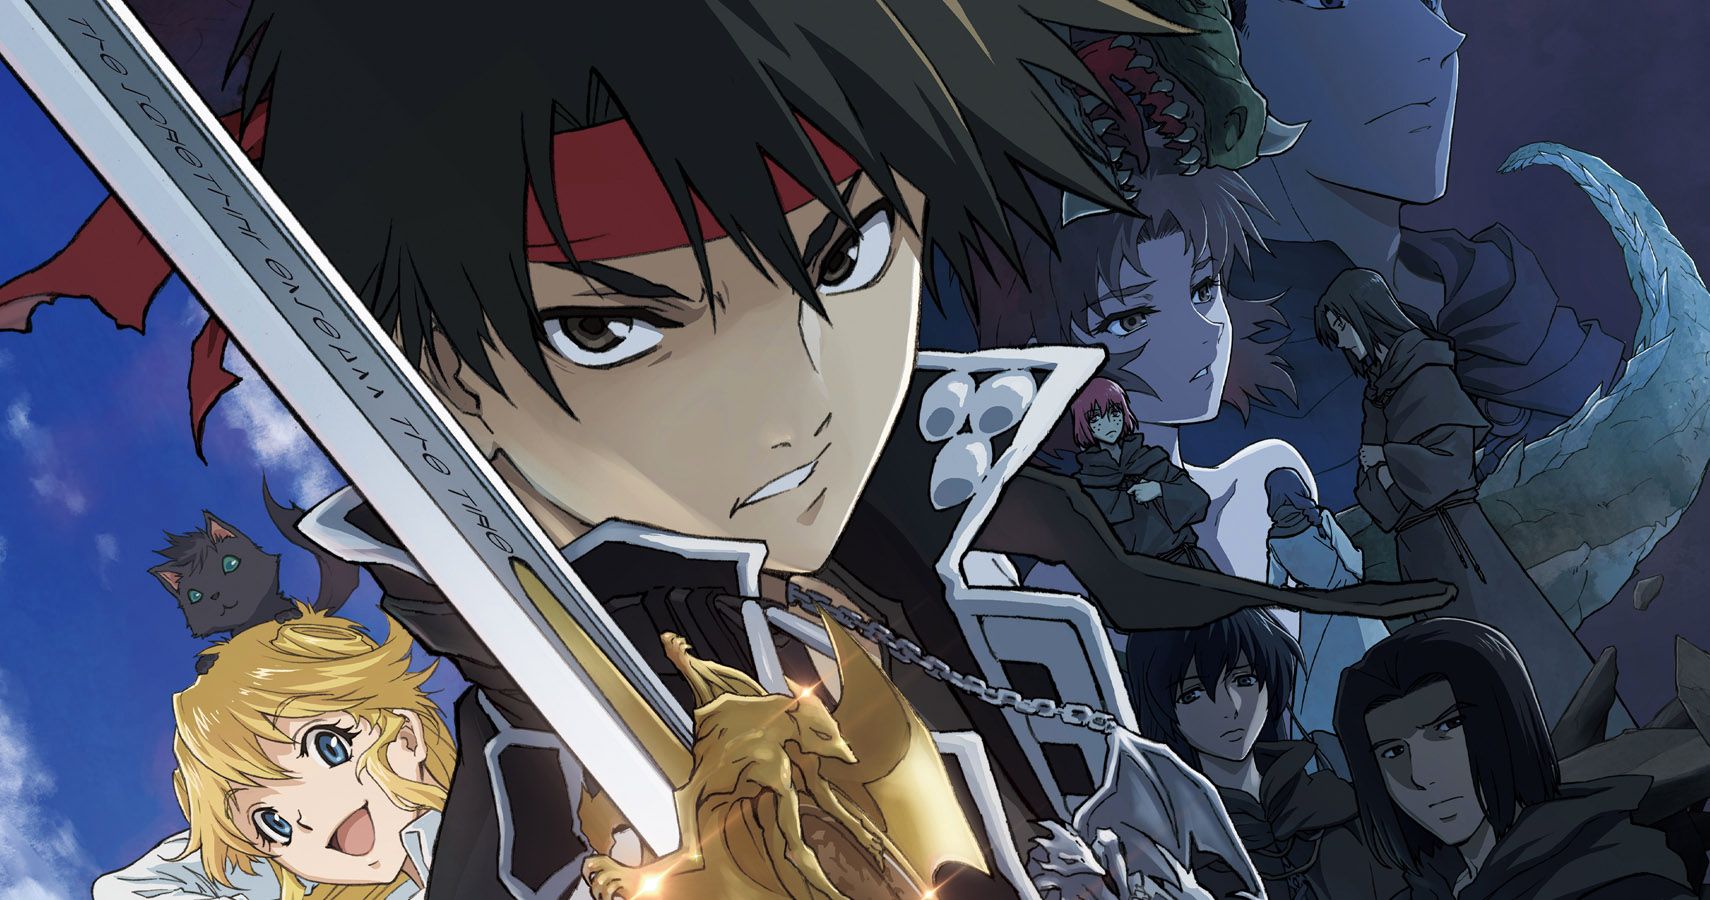 10 Thing Anime Fans Should Know About The Sorcerous Stabber Orphen Remake